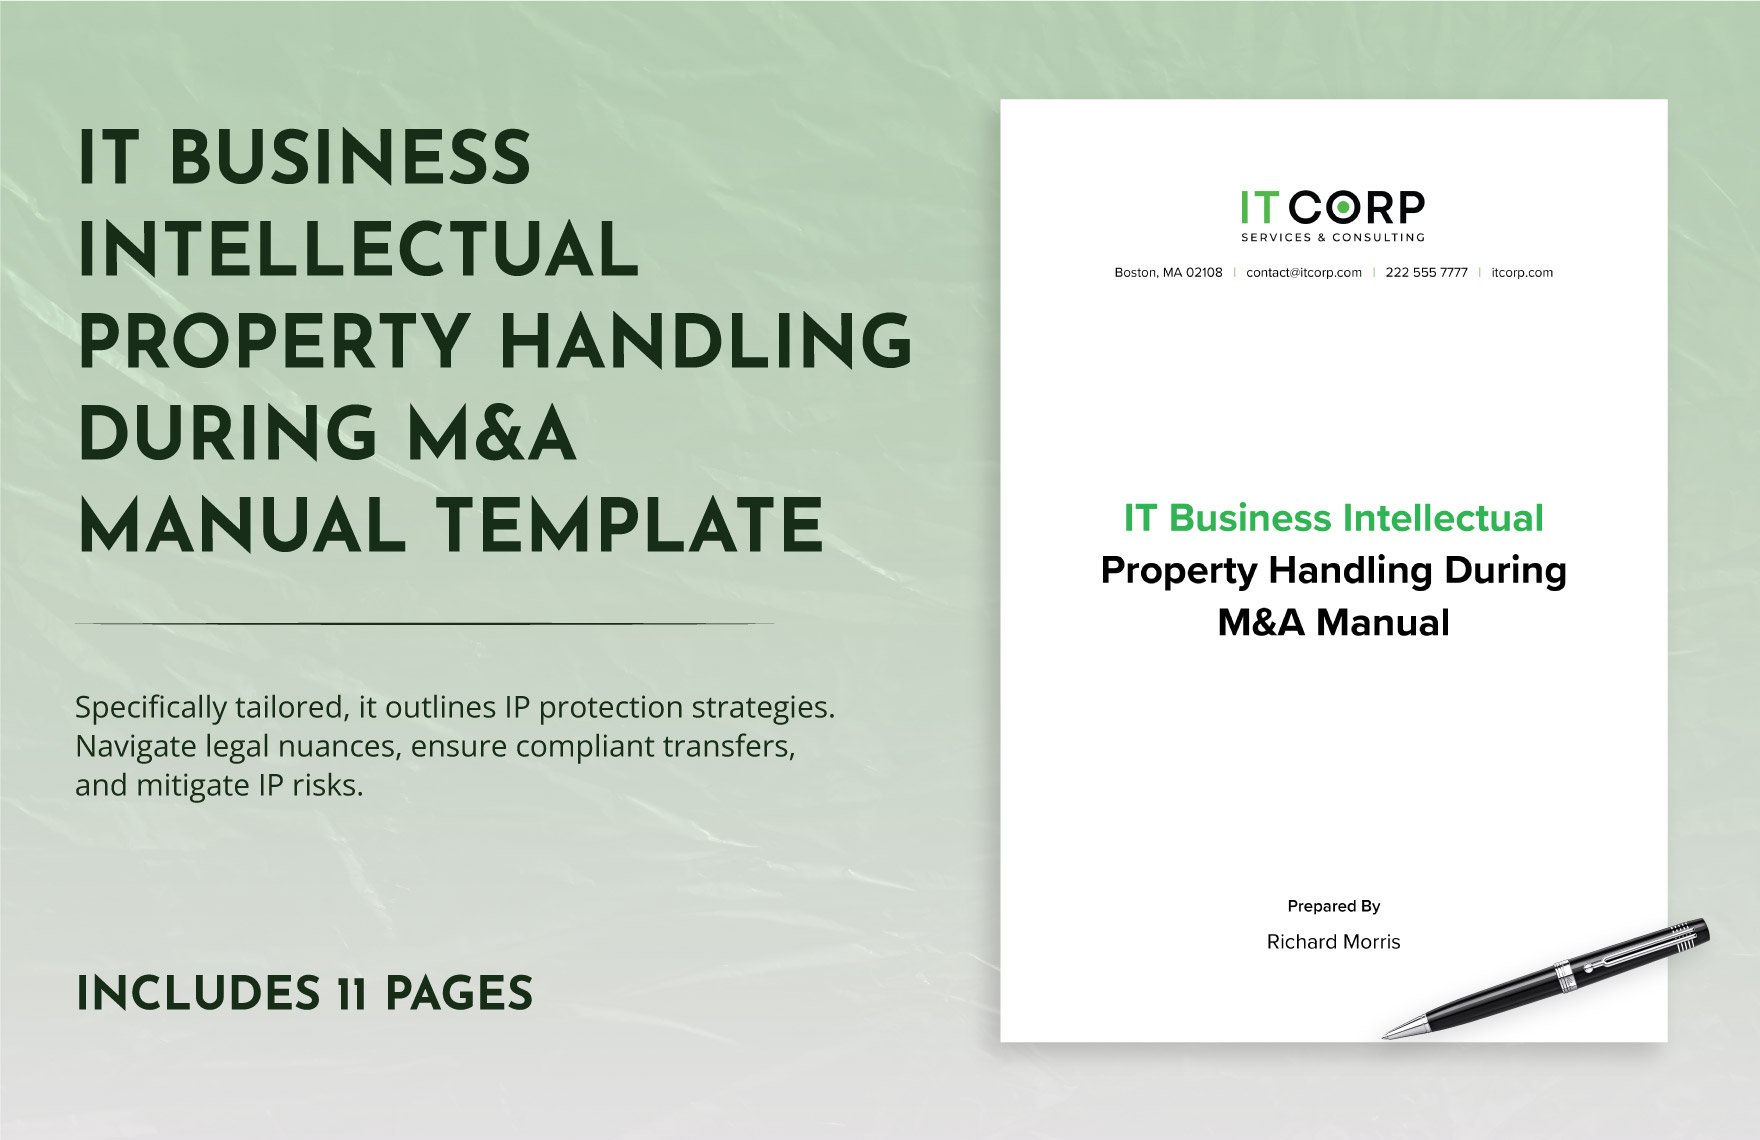 IT Business Intellectual Property Handling During M&A Manual Template in Word, Google Docs, PDF